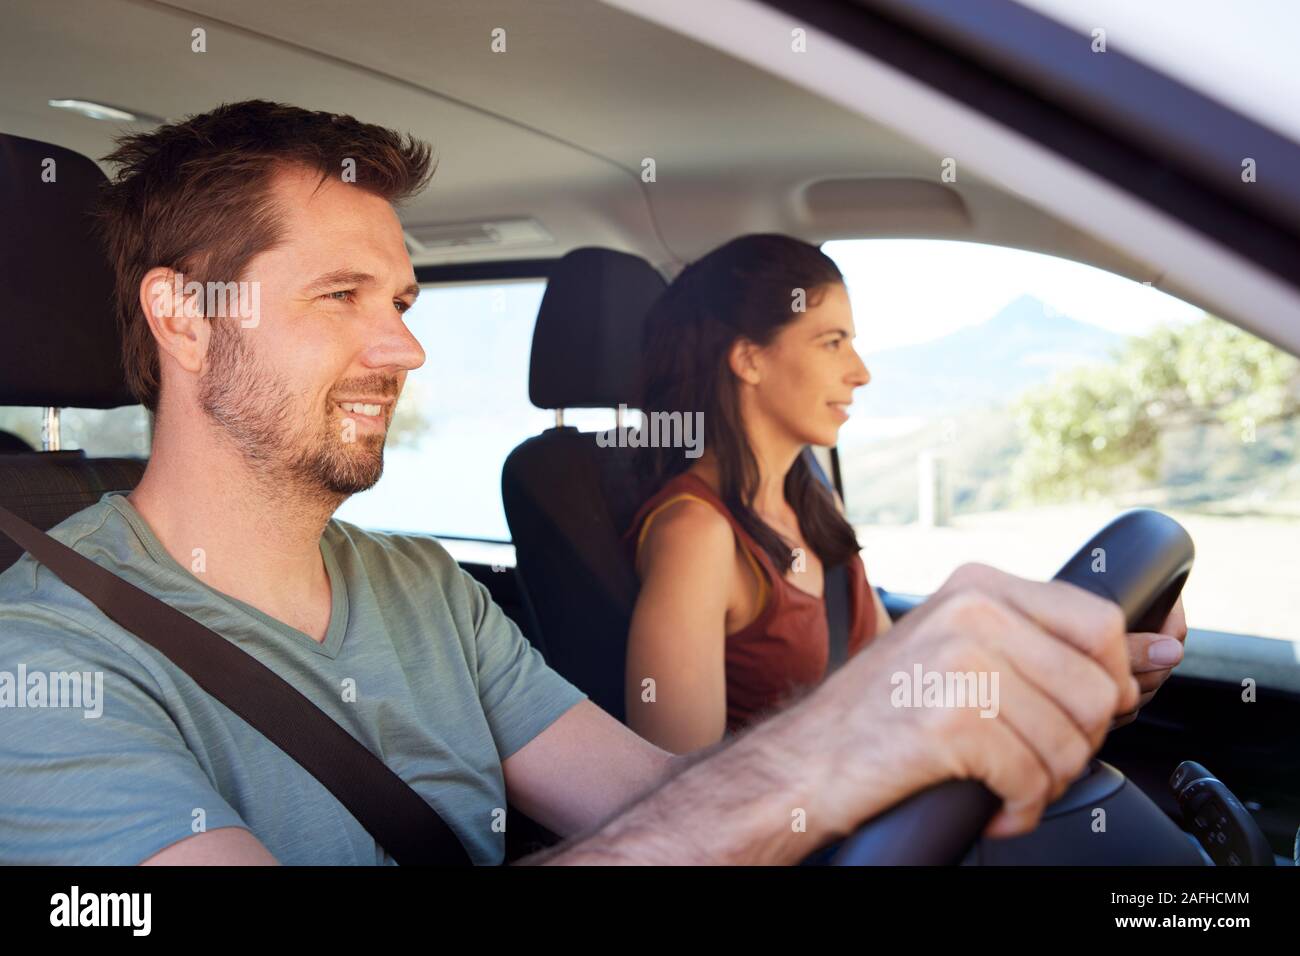 Mid adult white man driving car, his wife beside him in front passenger seat, close up, side view Stock Photo